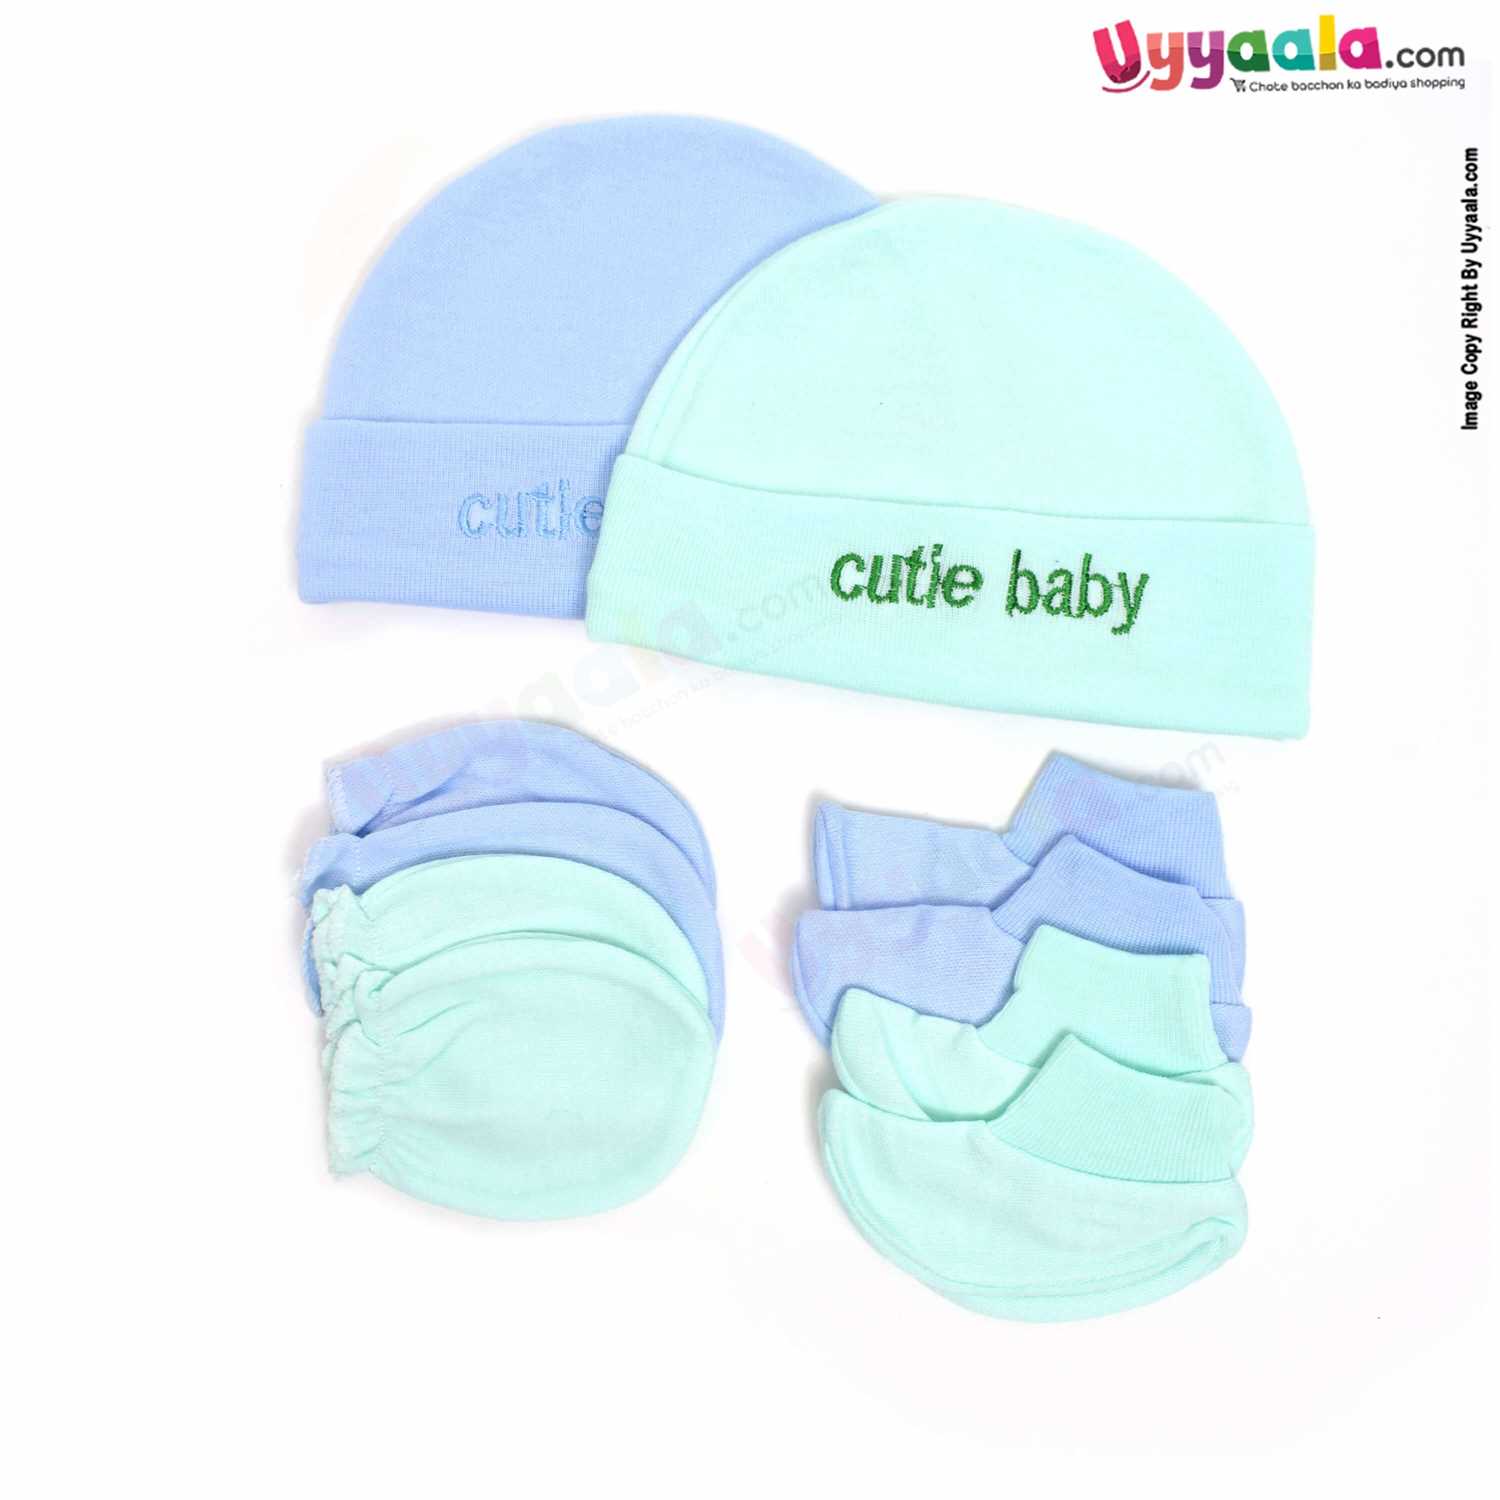 MONTALY Premium Quality Soft Hosiery Cotton Mitten, Booty & Cap Set for Babies Pack of 2 ,0-3m Age- Green & Blue